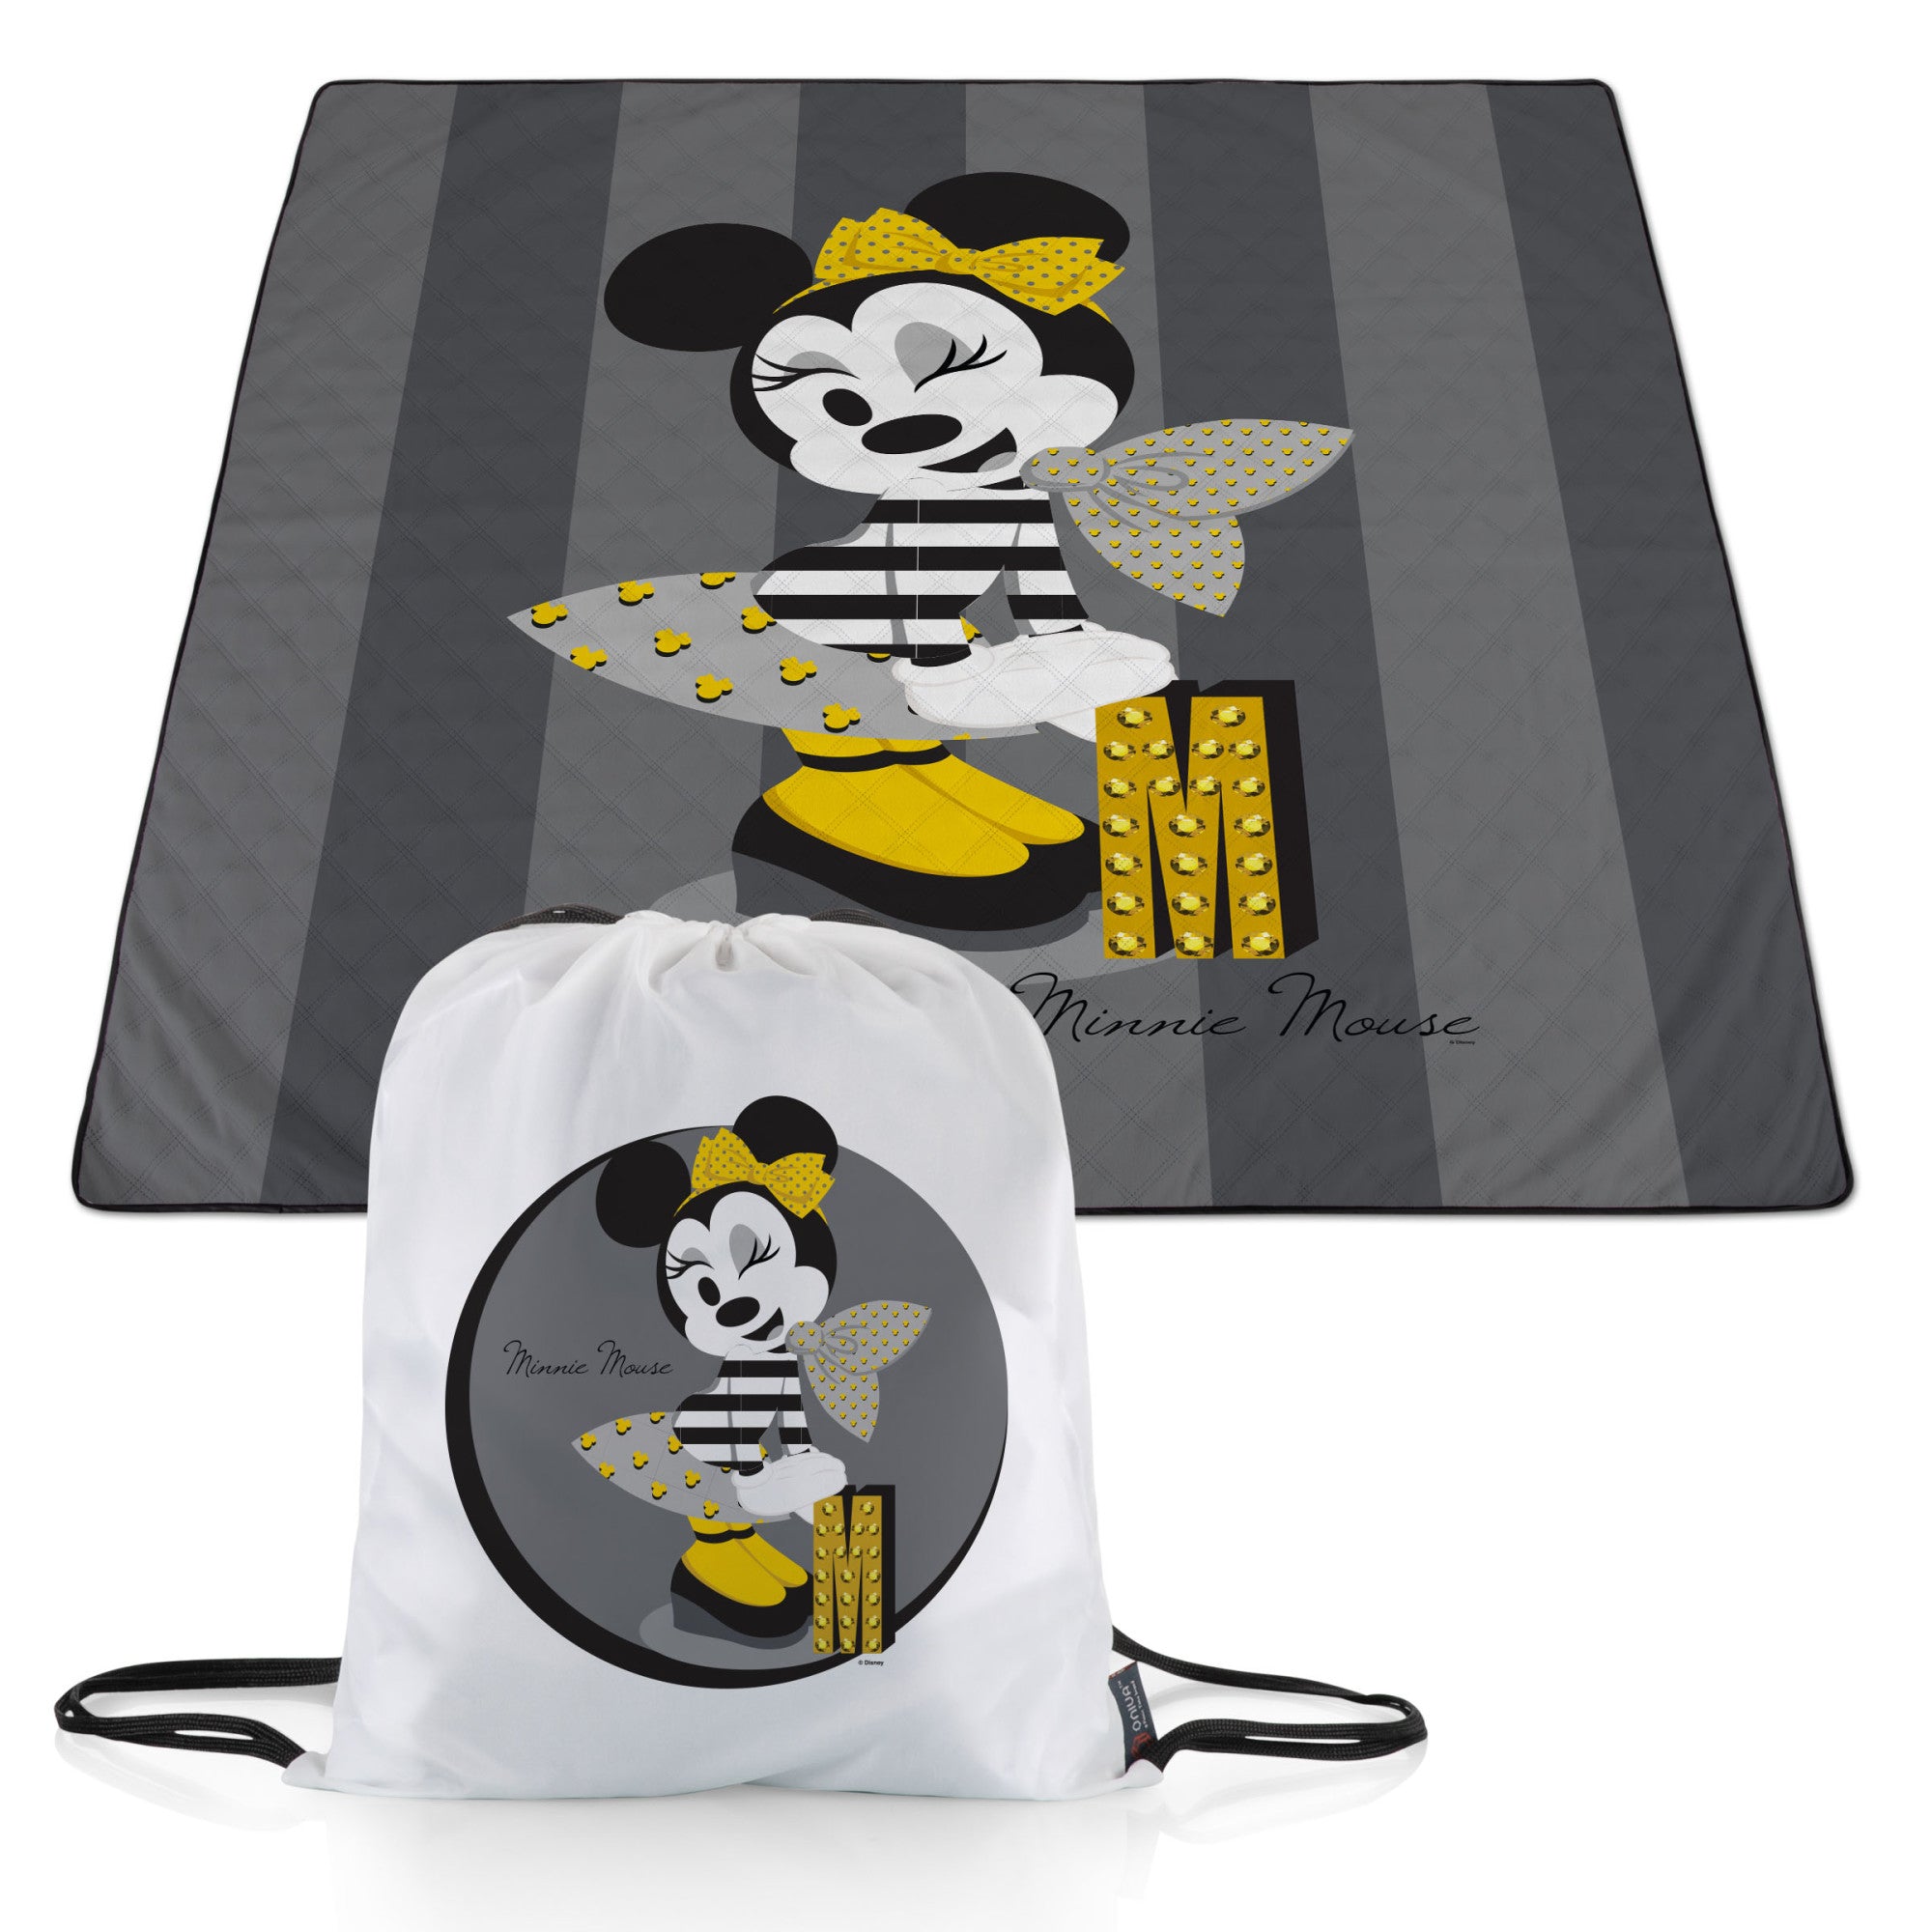 Disney's Minnie Mouse Lunch Tote by Picnic Time